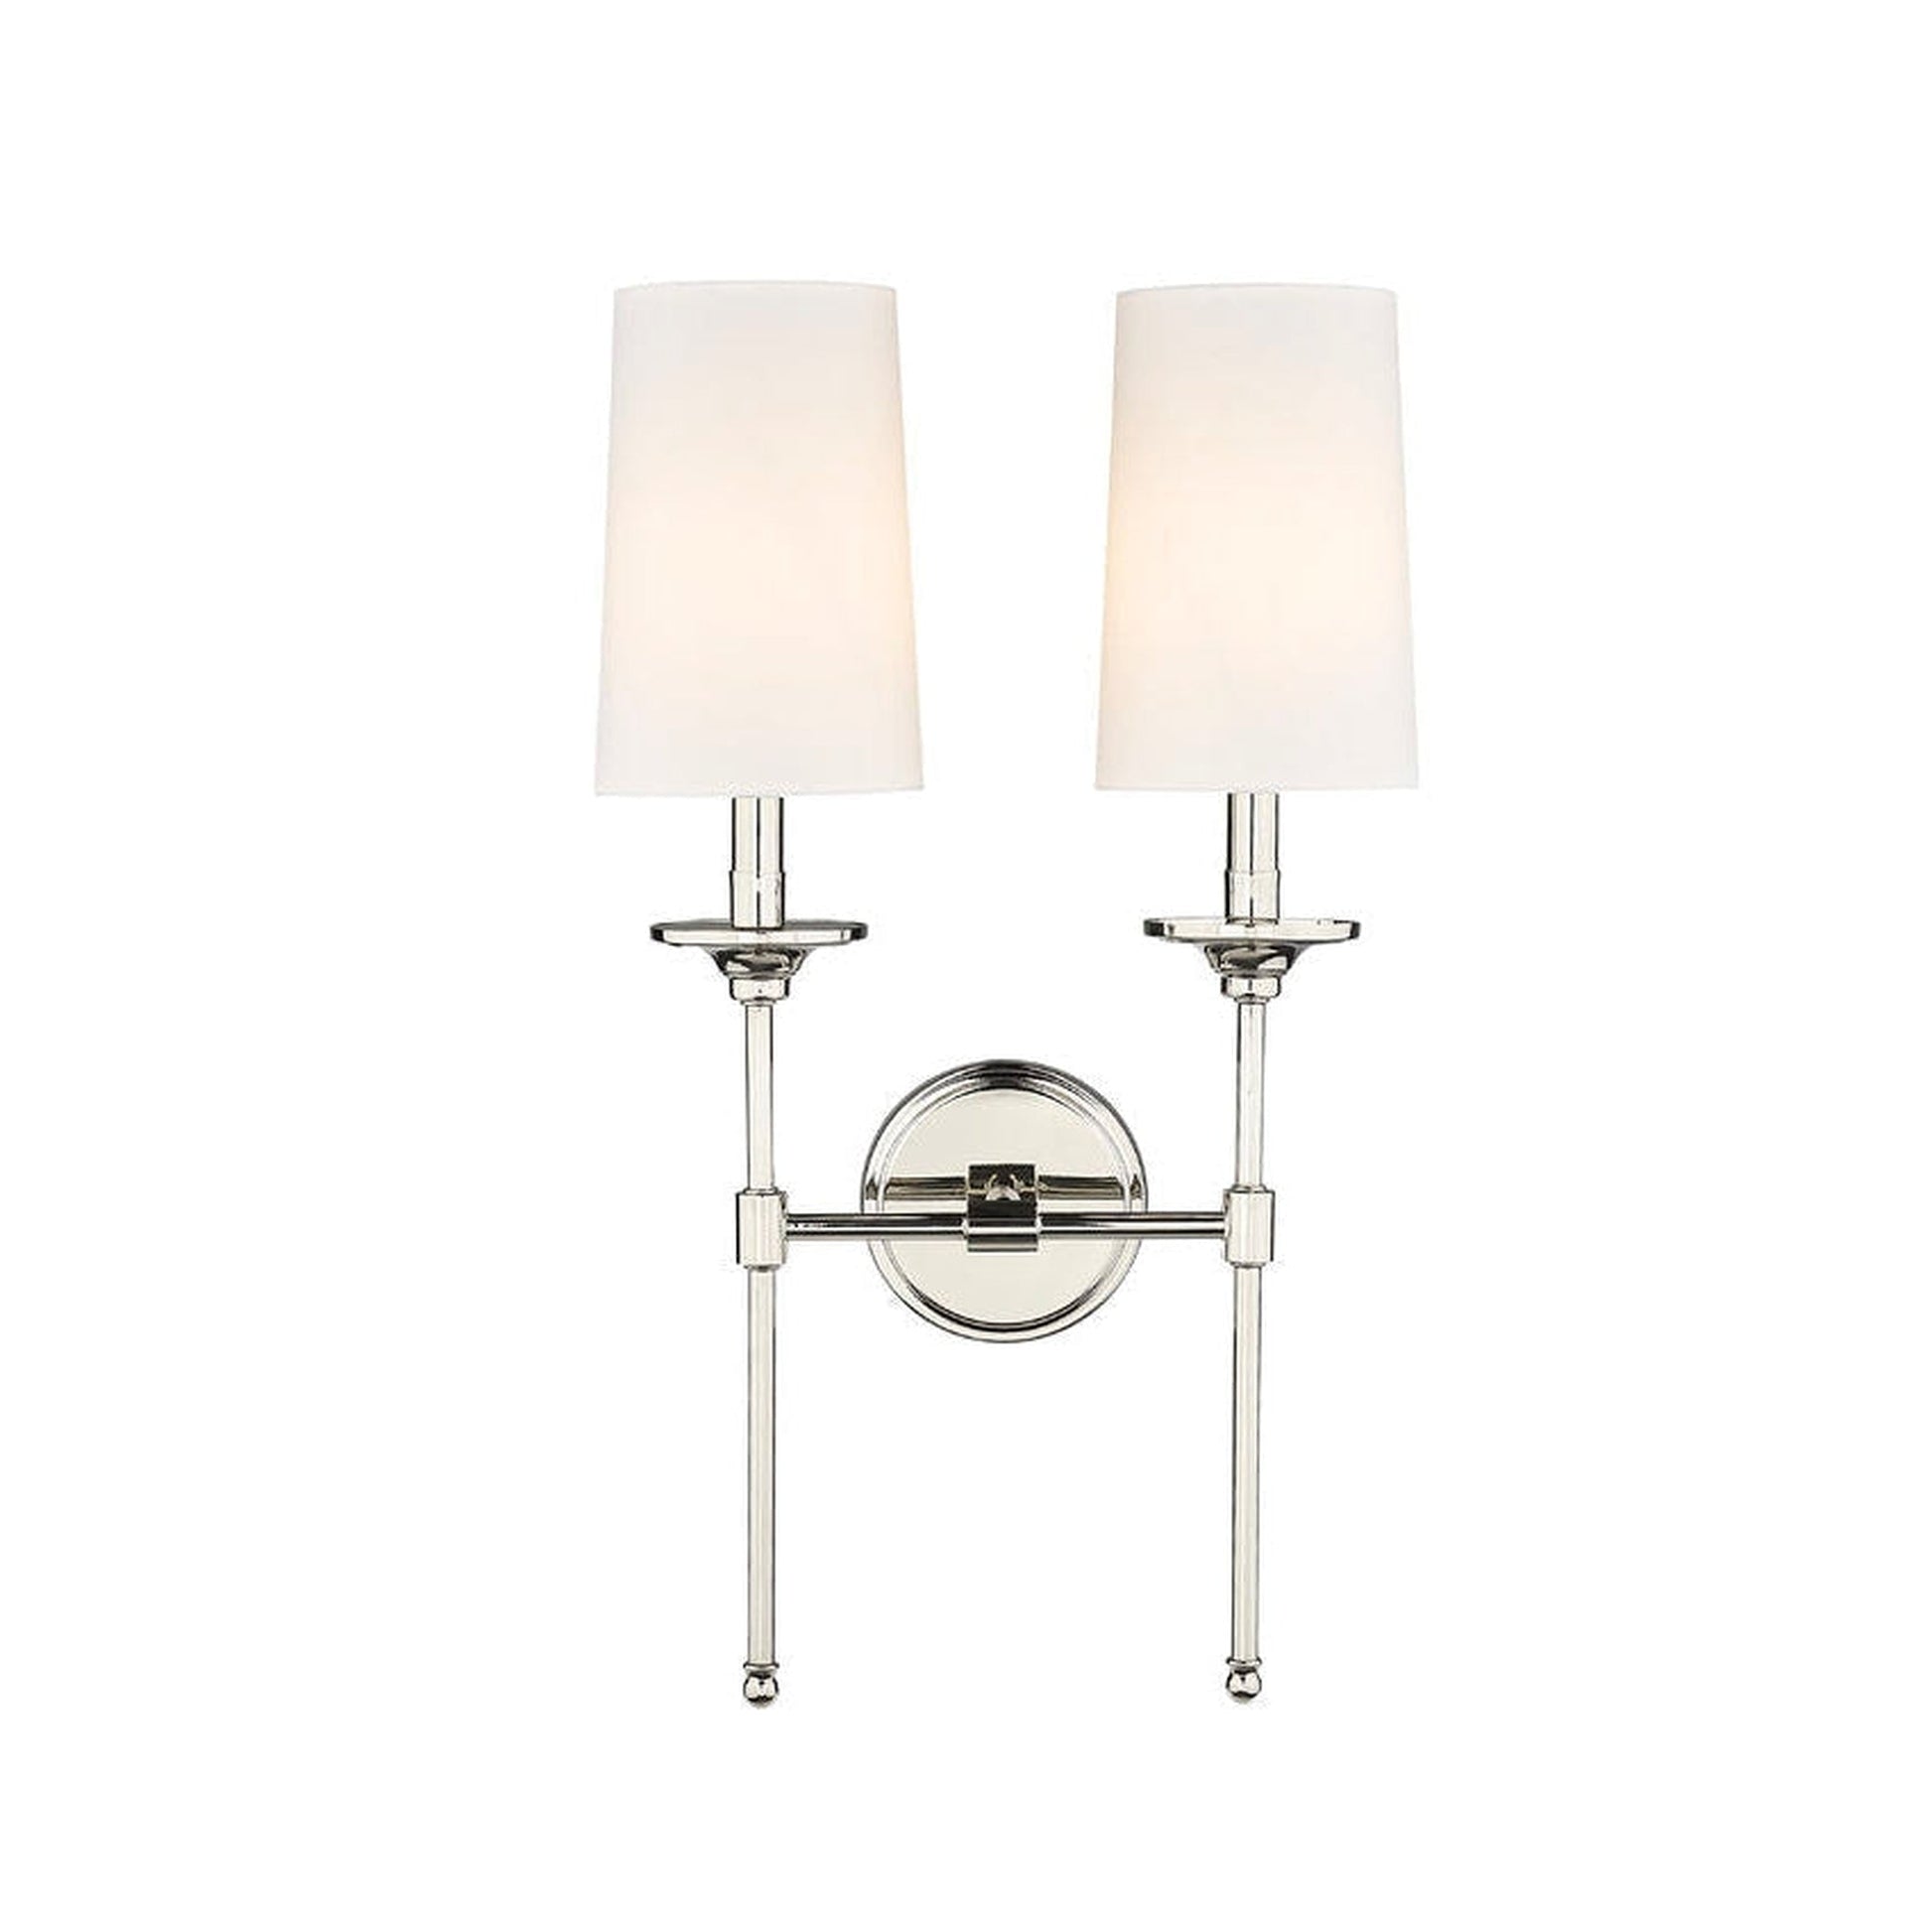 Z-Lite Emily 14" 2-Light Polished Nickel Wall Sconce With Off-White Cloth Shade